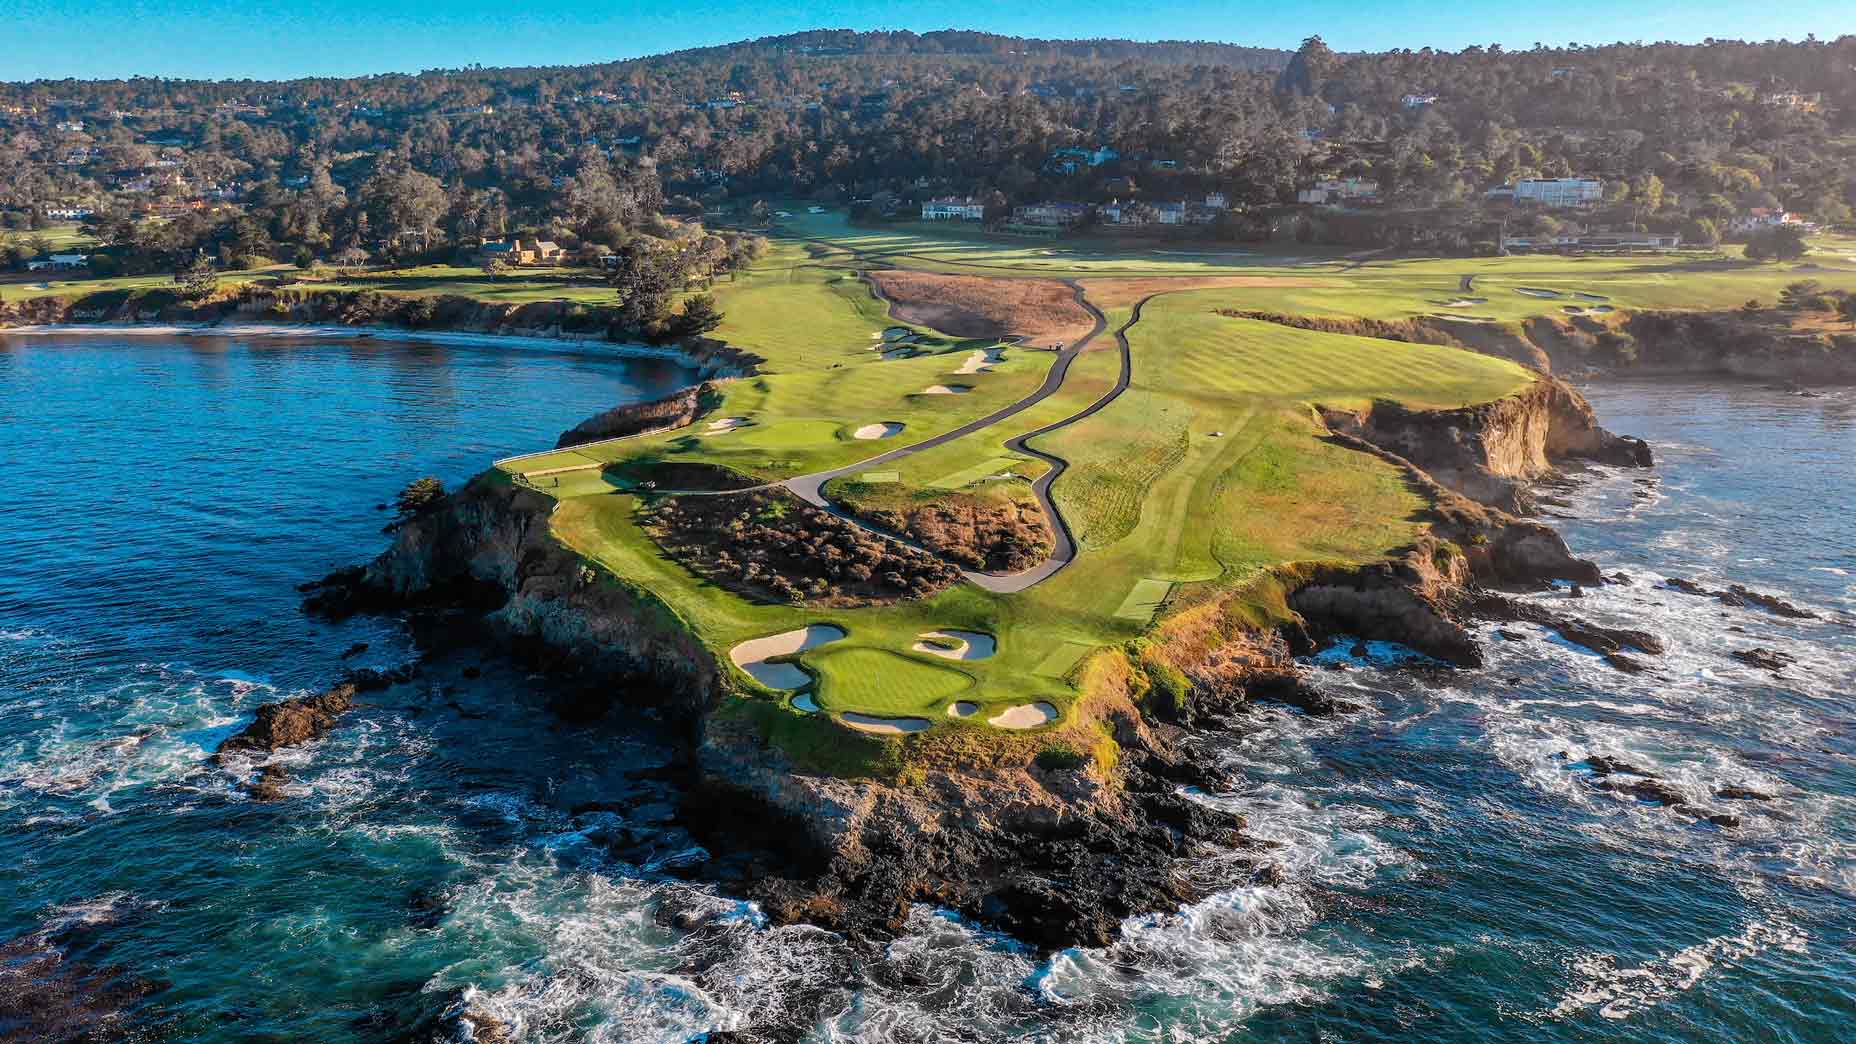 How does it cost to play Pebble Beach?